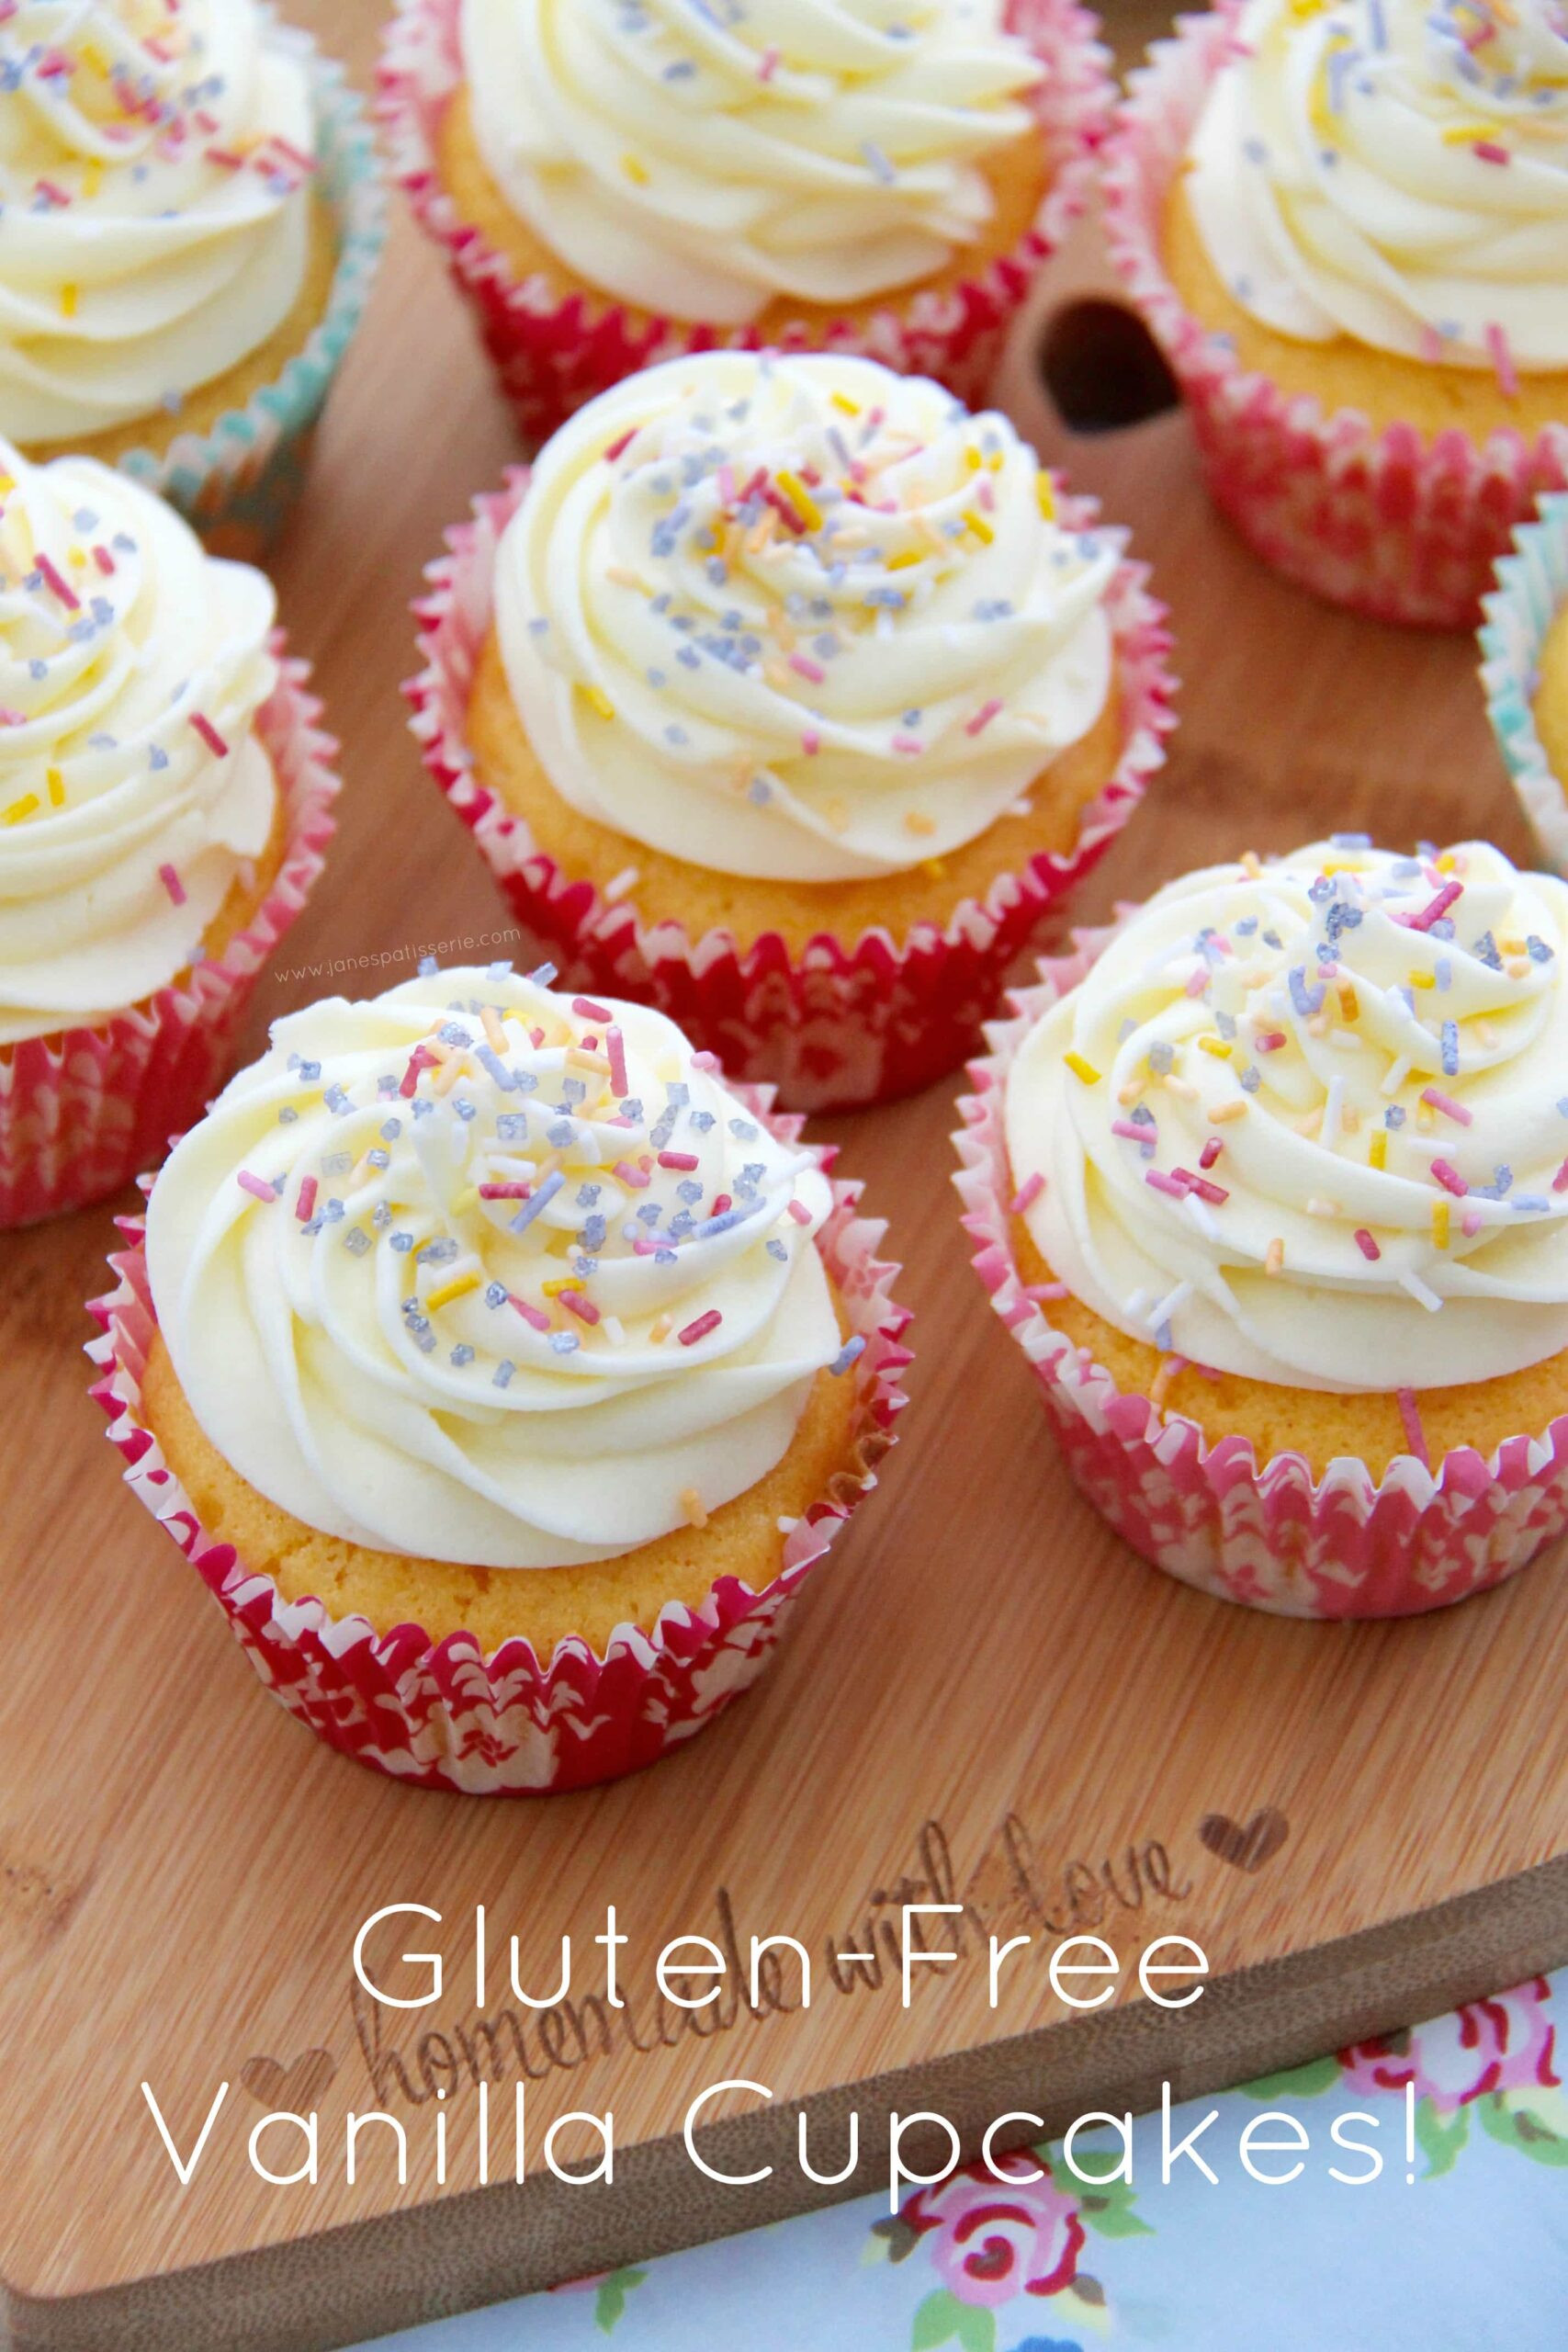 Best Ever Gluten and Dairy Free Cupcakes